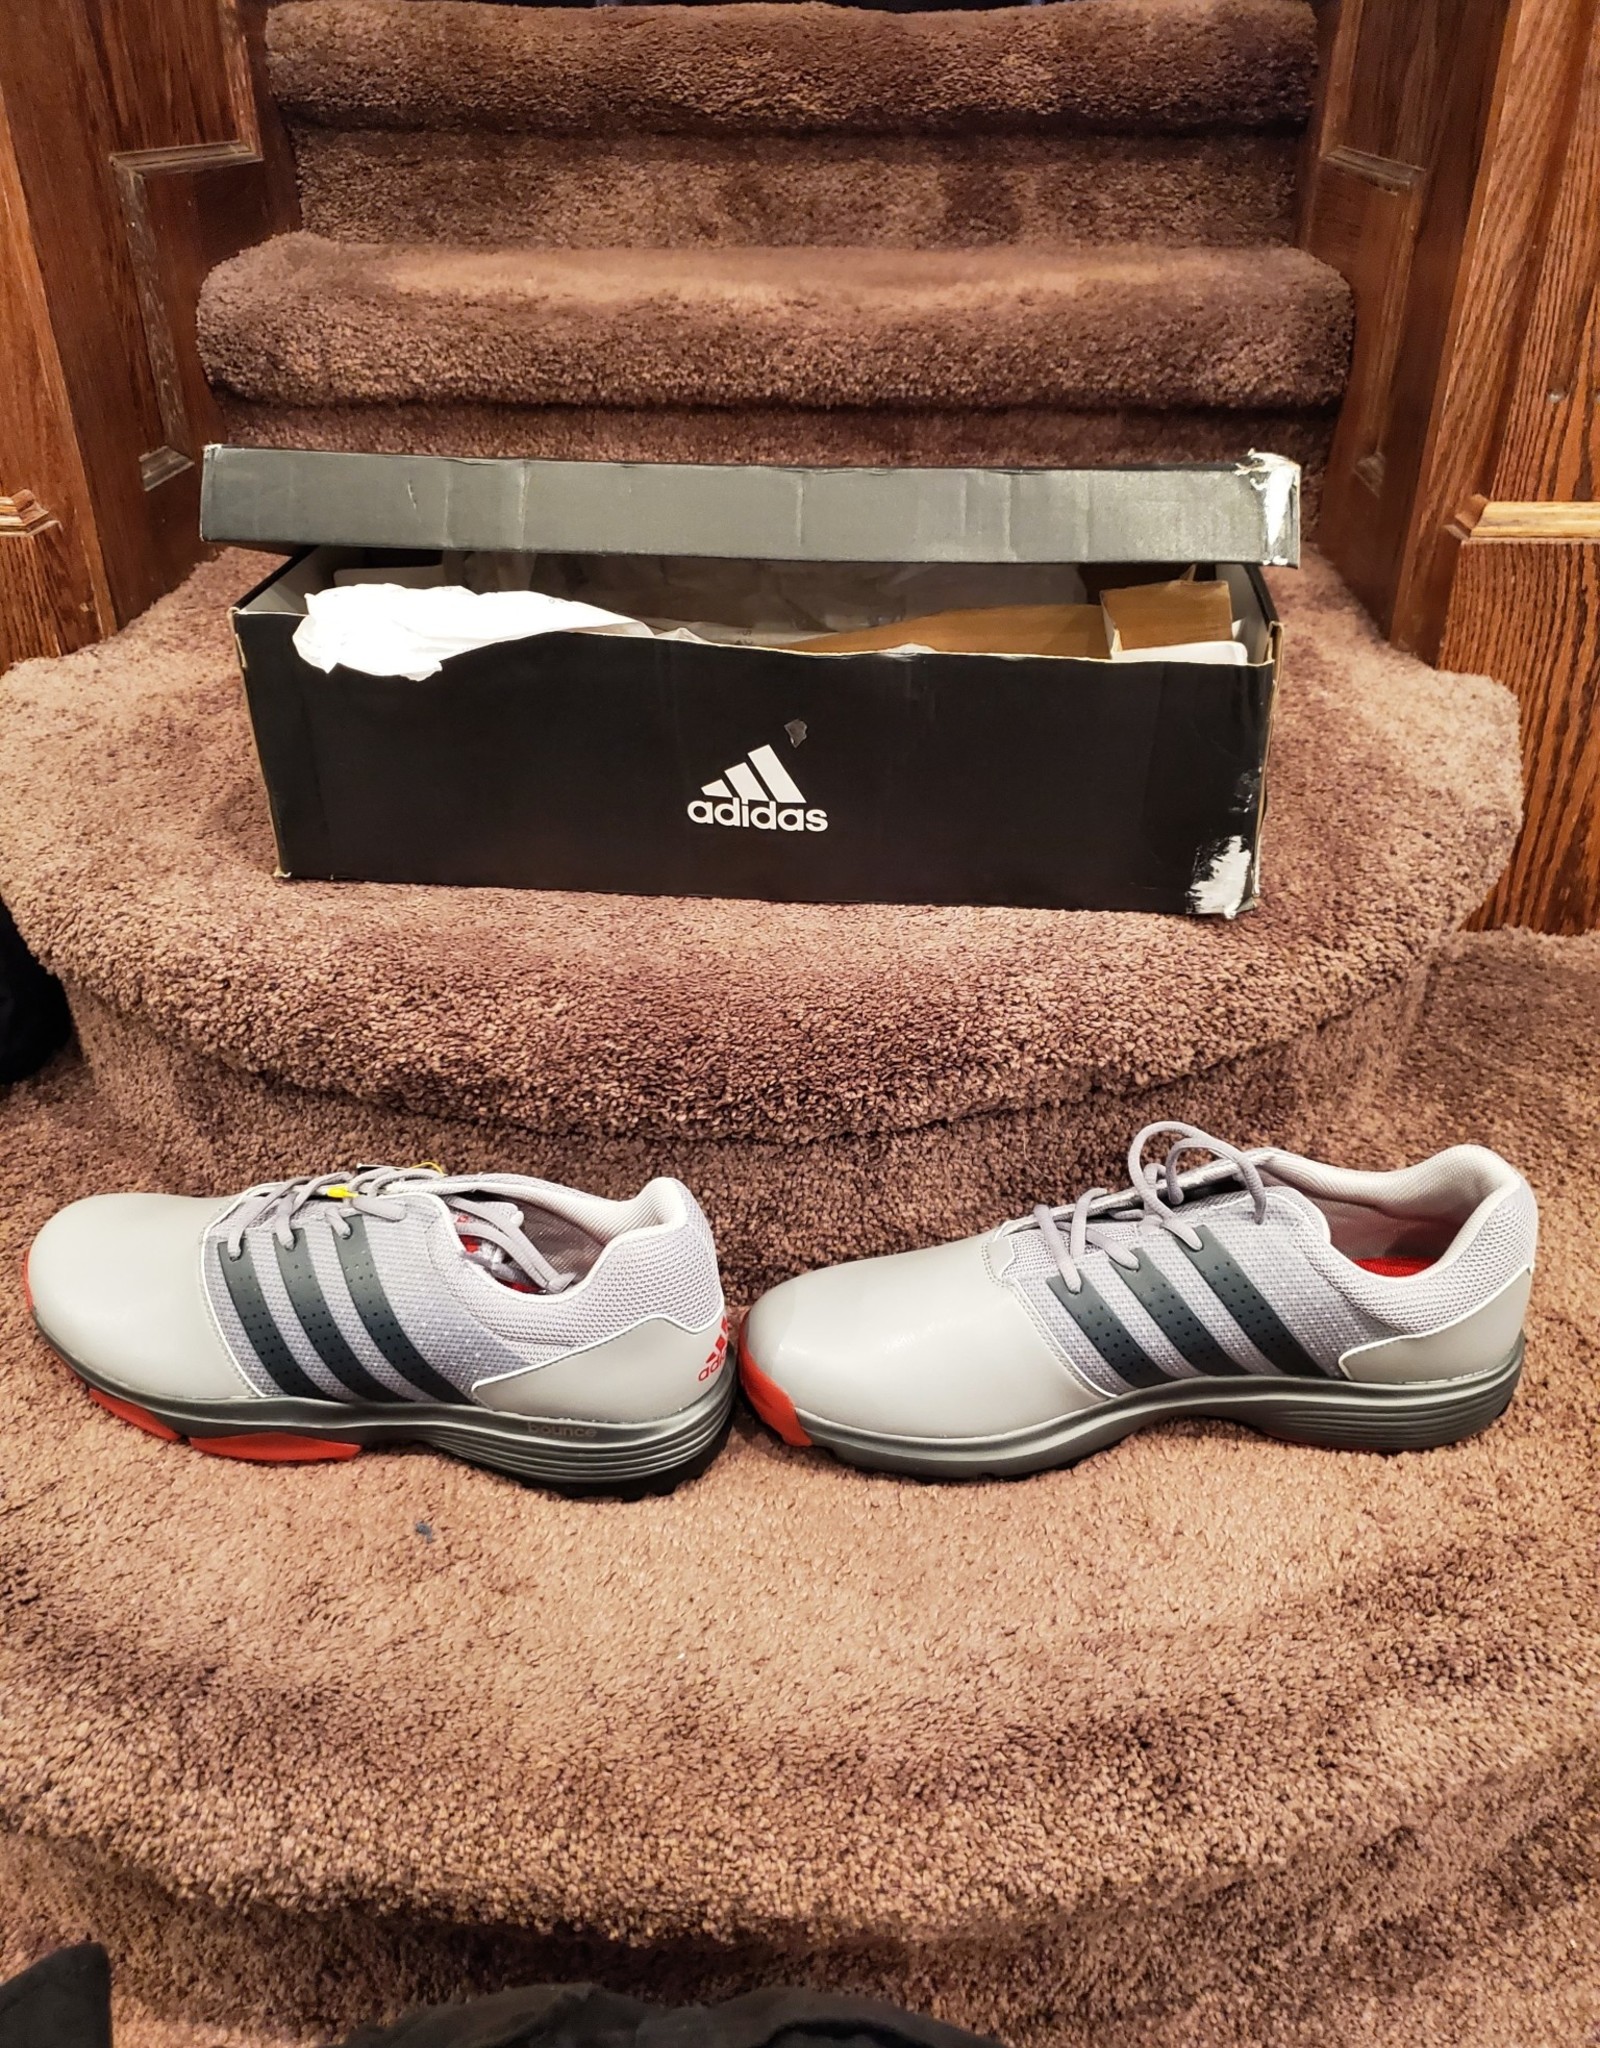 Adidas 360 traxion golf shoes NEW 15 M 